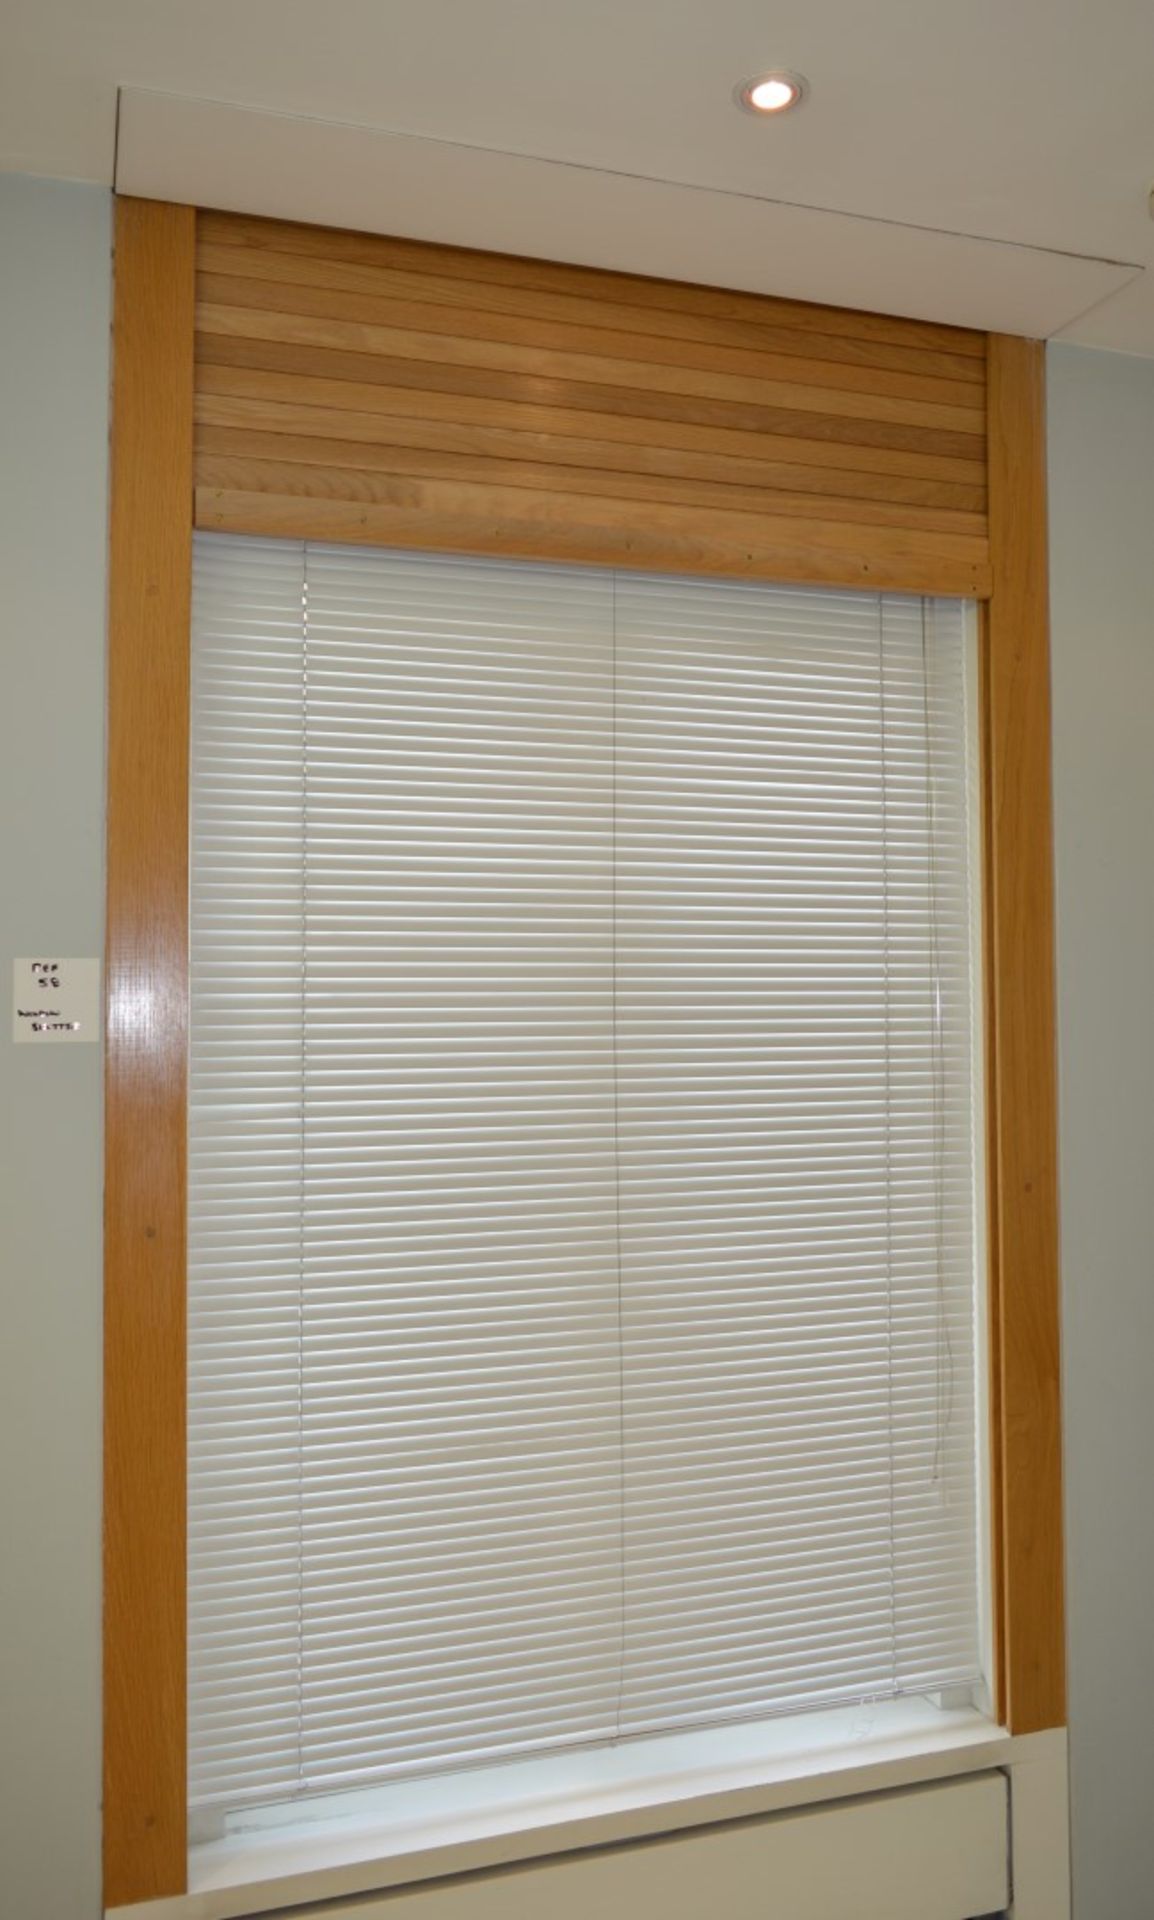 1 x Roller Shutter Window Shade With Electric Motor - Ref 58 - Solid Wooden Slat Design - CL230 - - Image 8 of 10